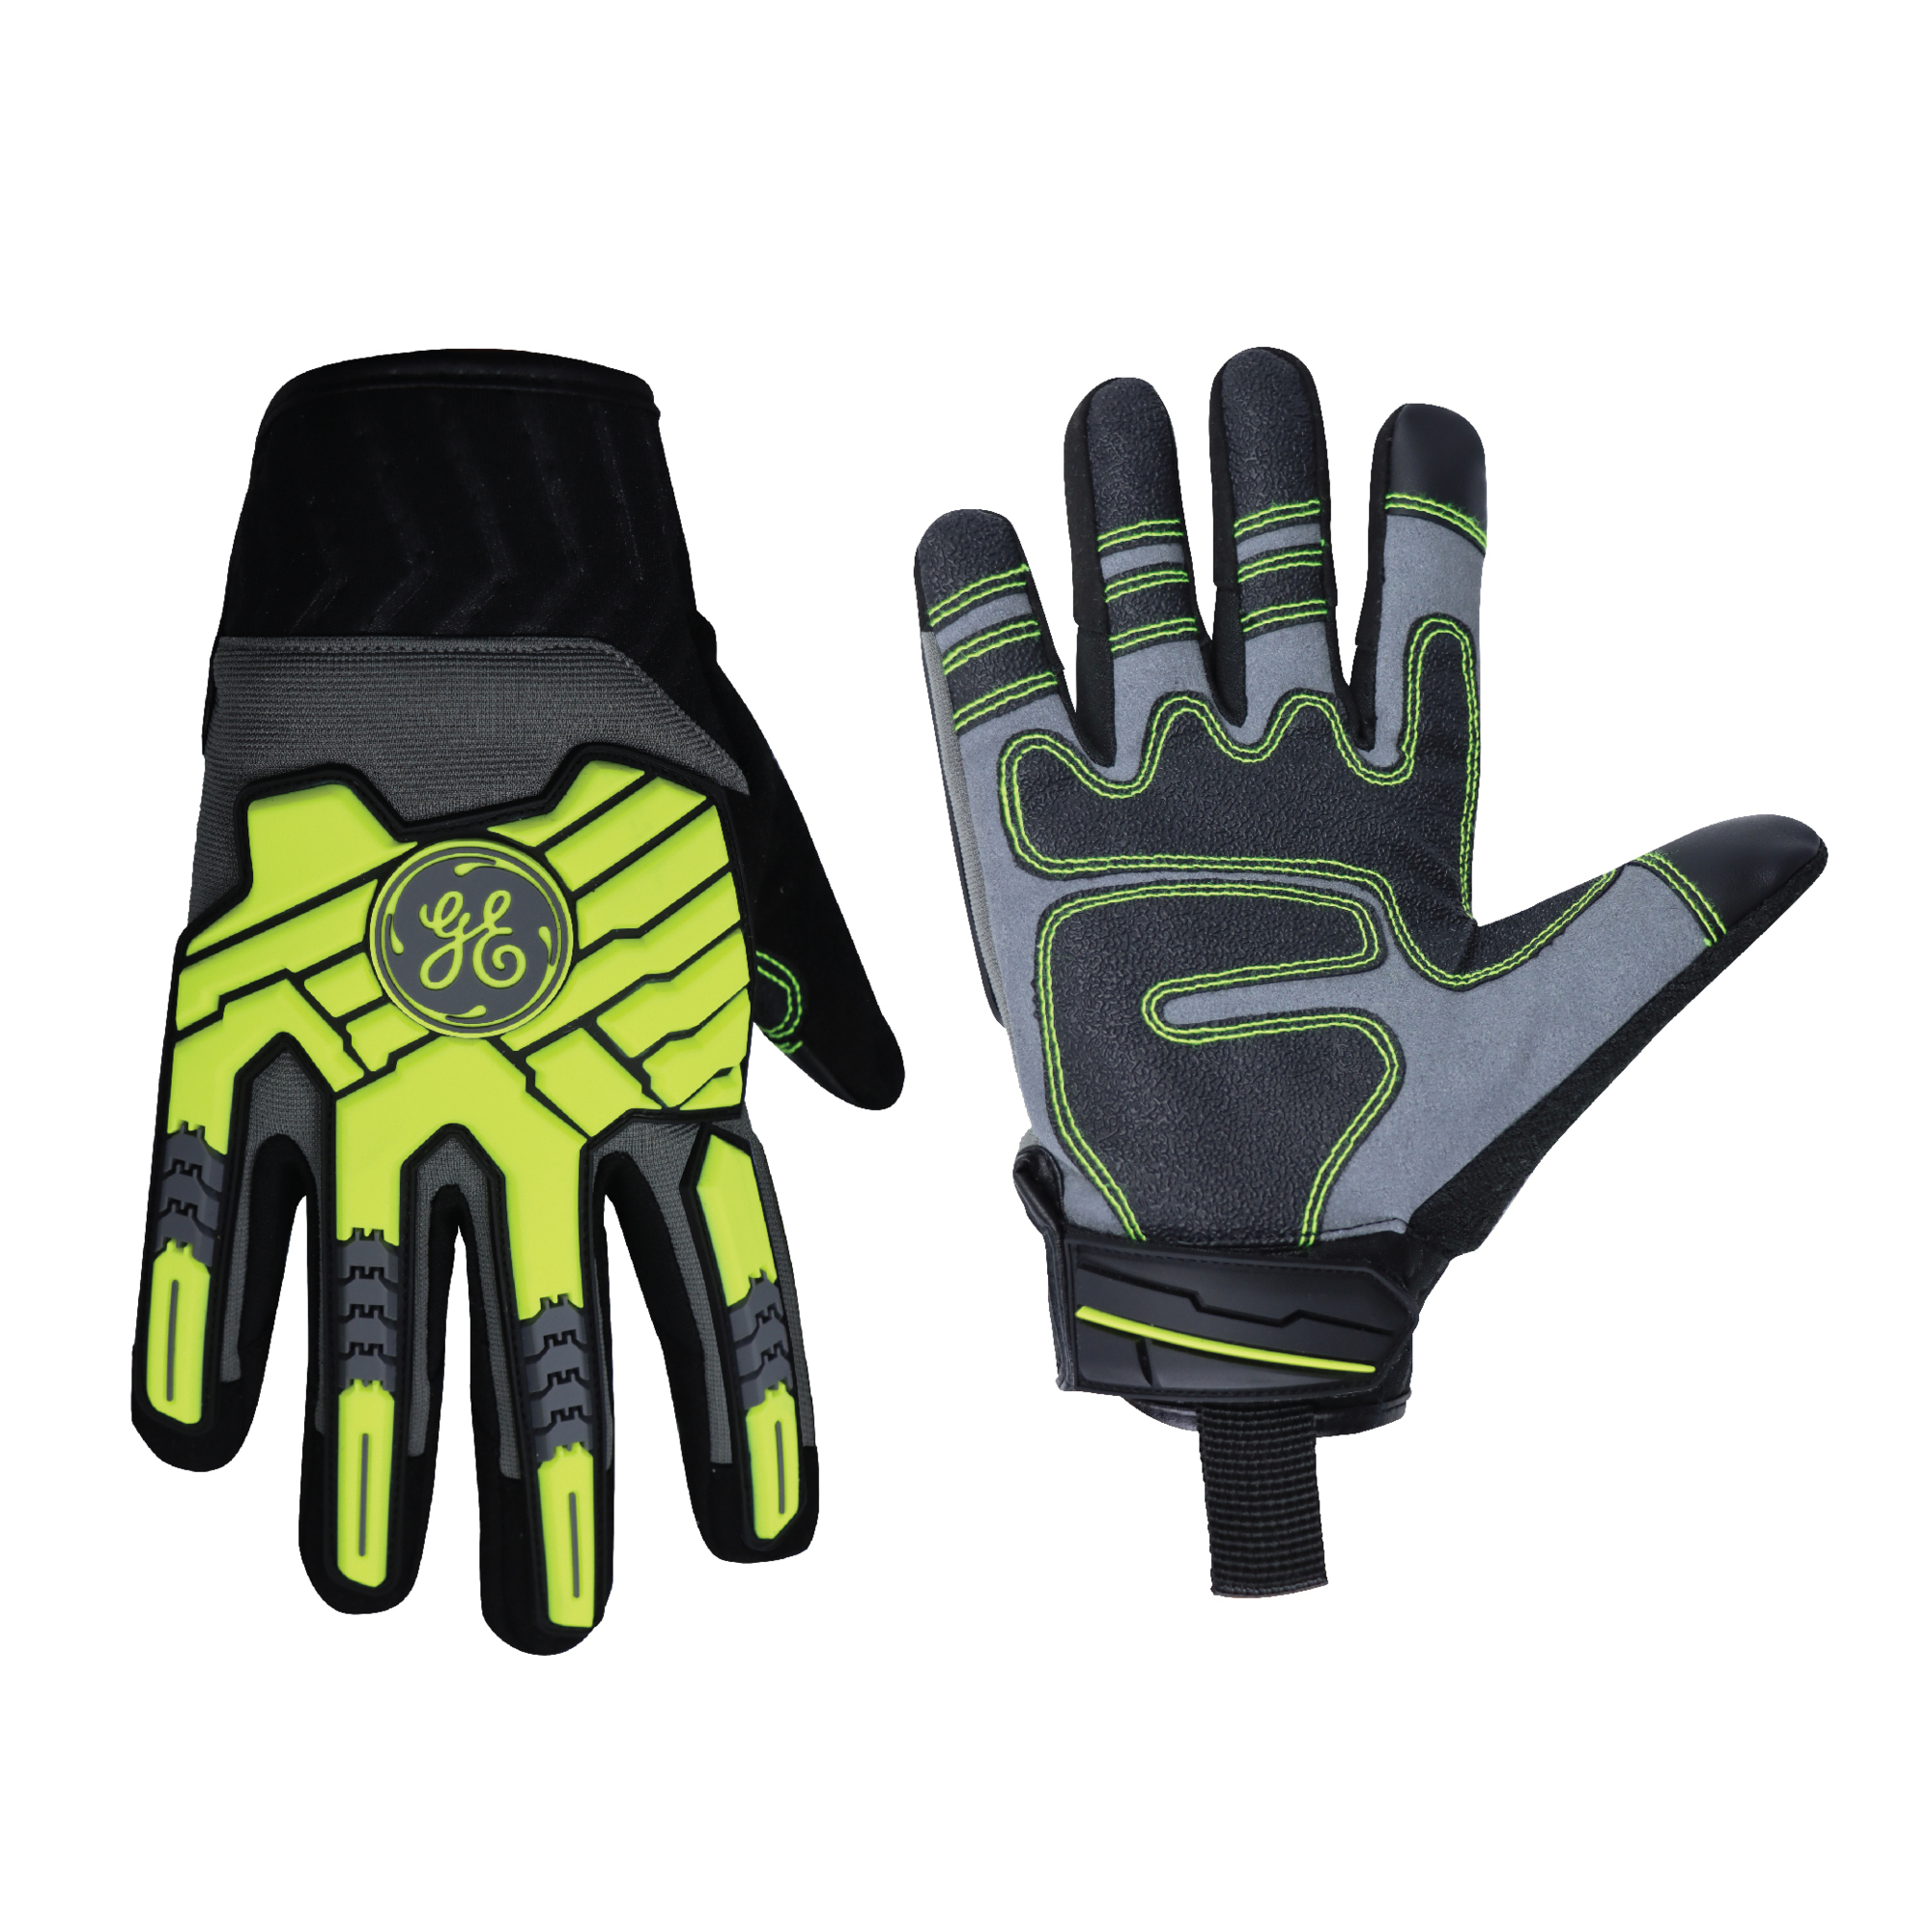 General Electric, Mechanic's Glove High-Vis Green XL 1 pair, Size XL, Included (qty.) 1, Model GG417XLC